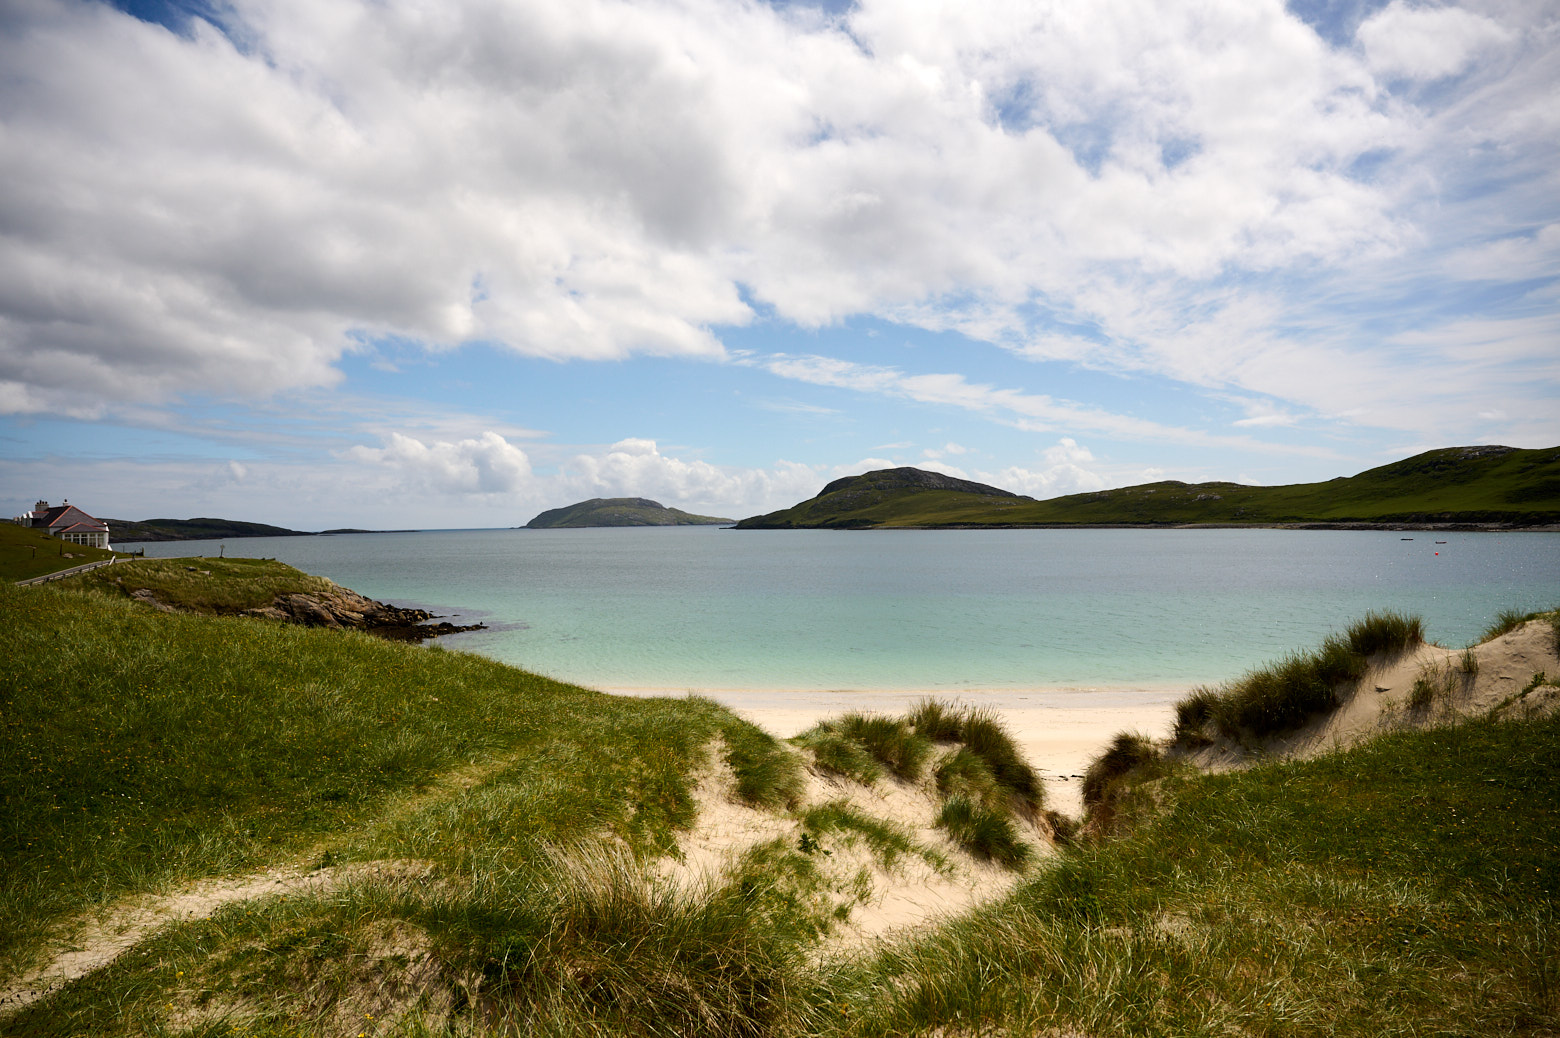 A walk along the famous beach on the Isle of Vatersay in the Outer Hebrides.